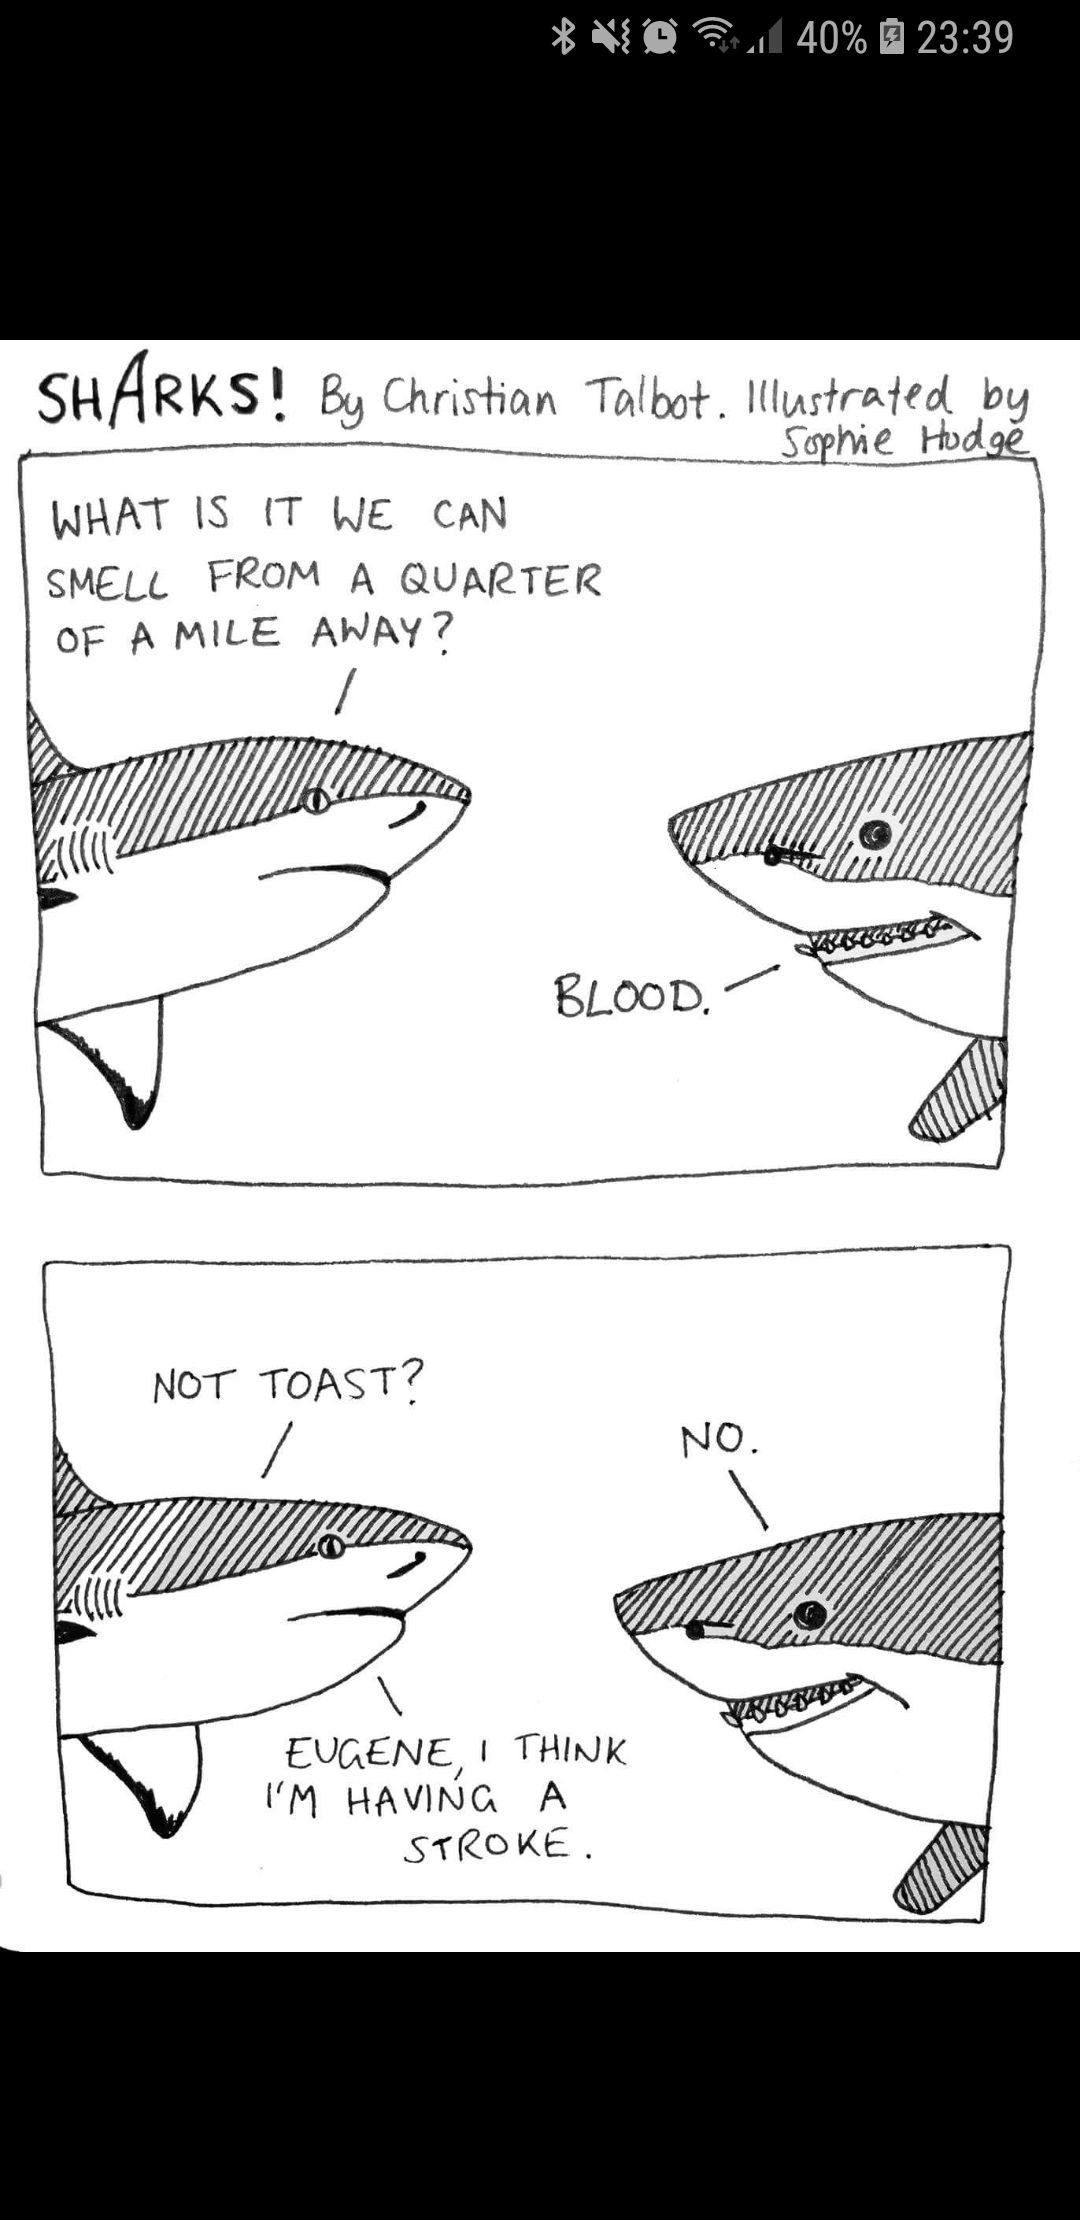 shark toast comic - Vid El 40% Sharks! By Christian Talbot. Illustrated by Sophie Hudge What Is It We Can Smell From A Quarter Of A Mile Away? Blood, Not Toast? No. Eugene, I Think I'M Having A Stroke.